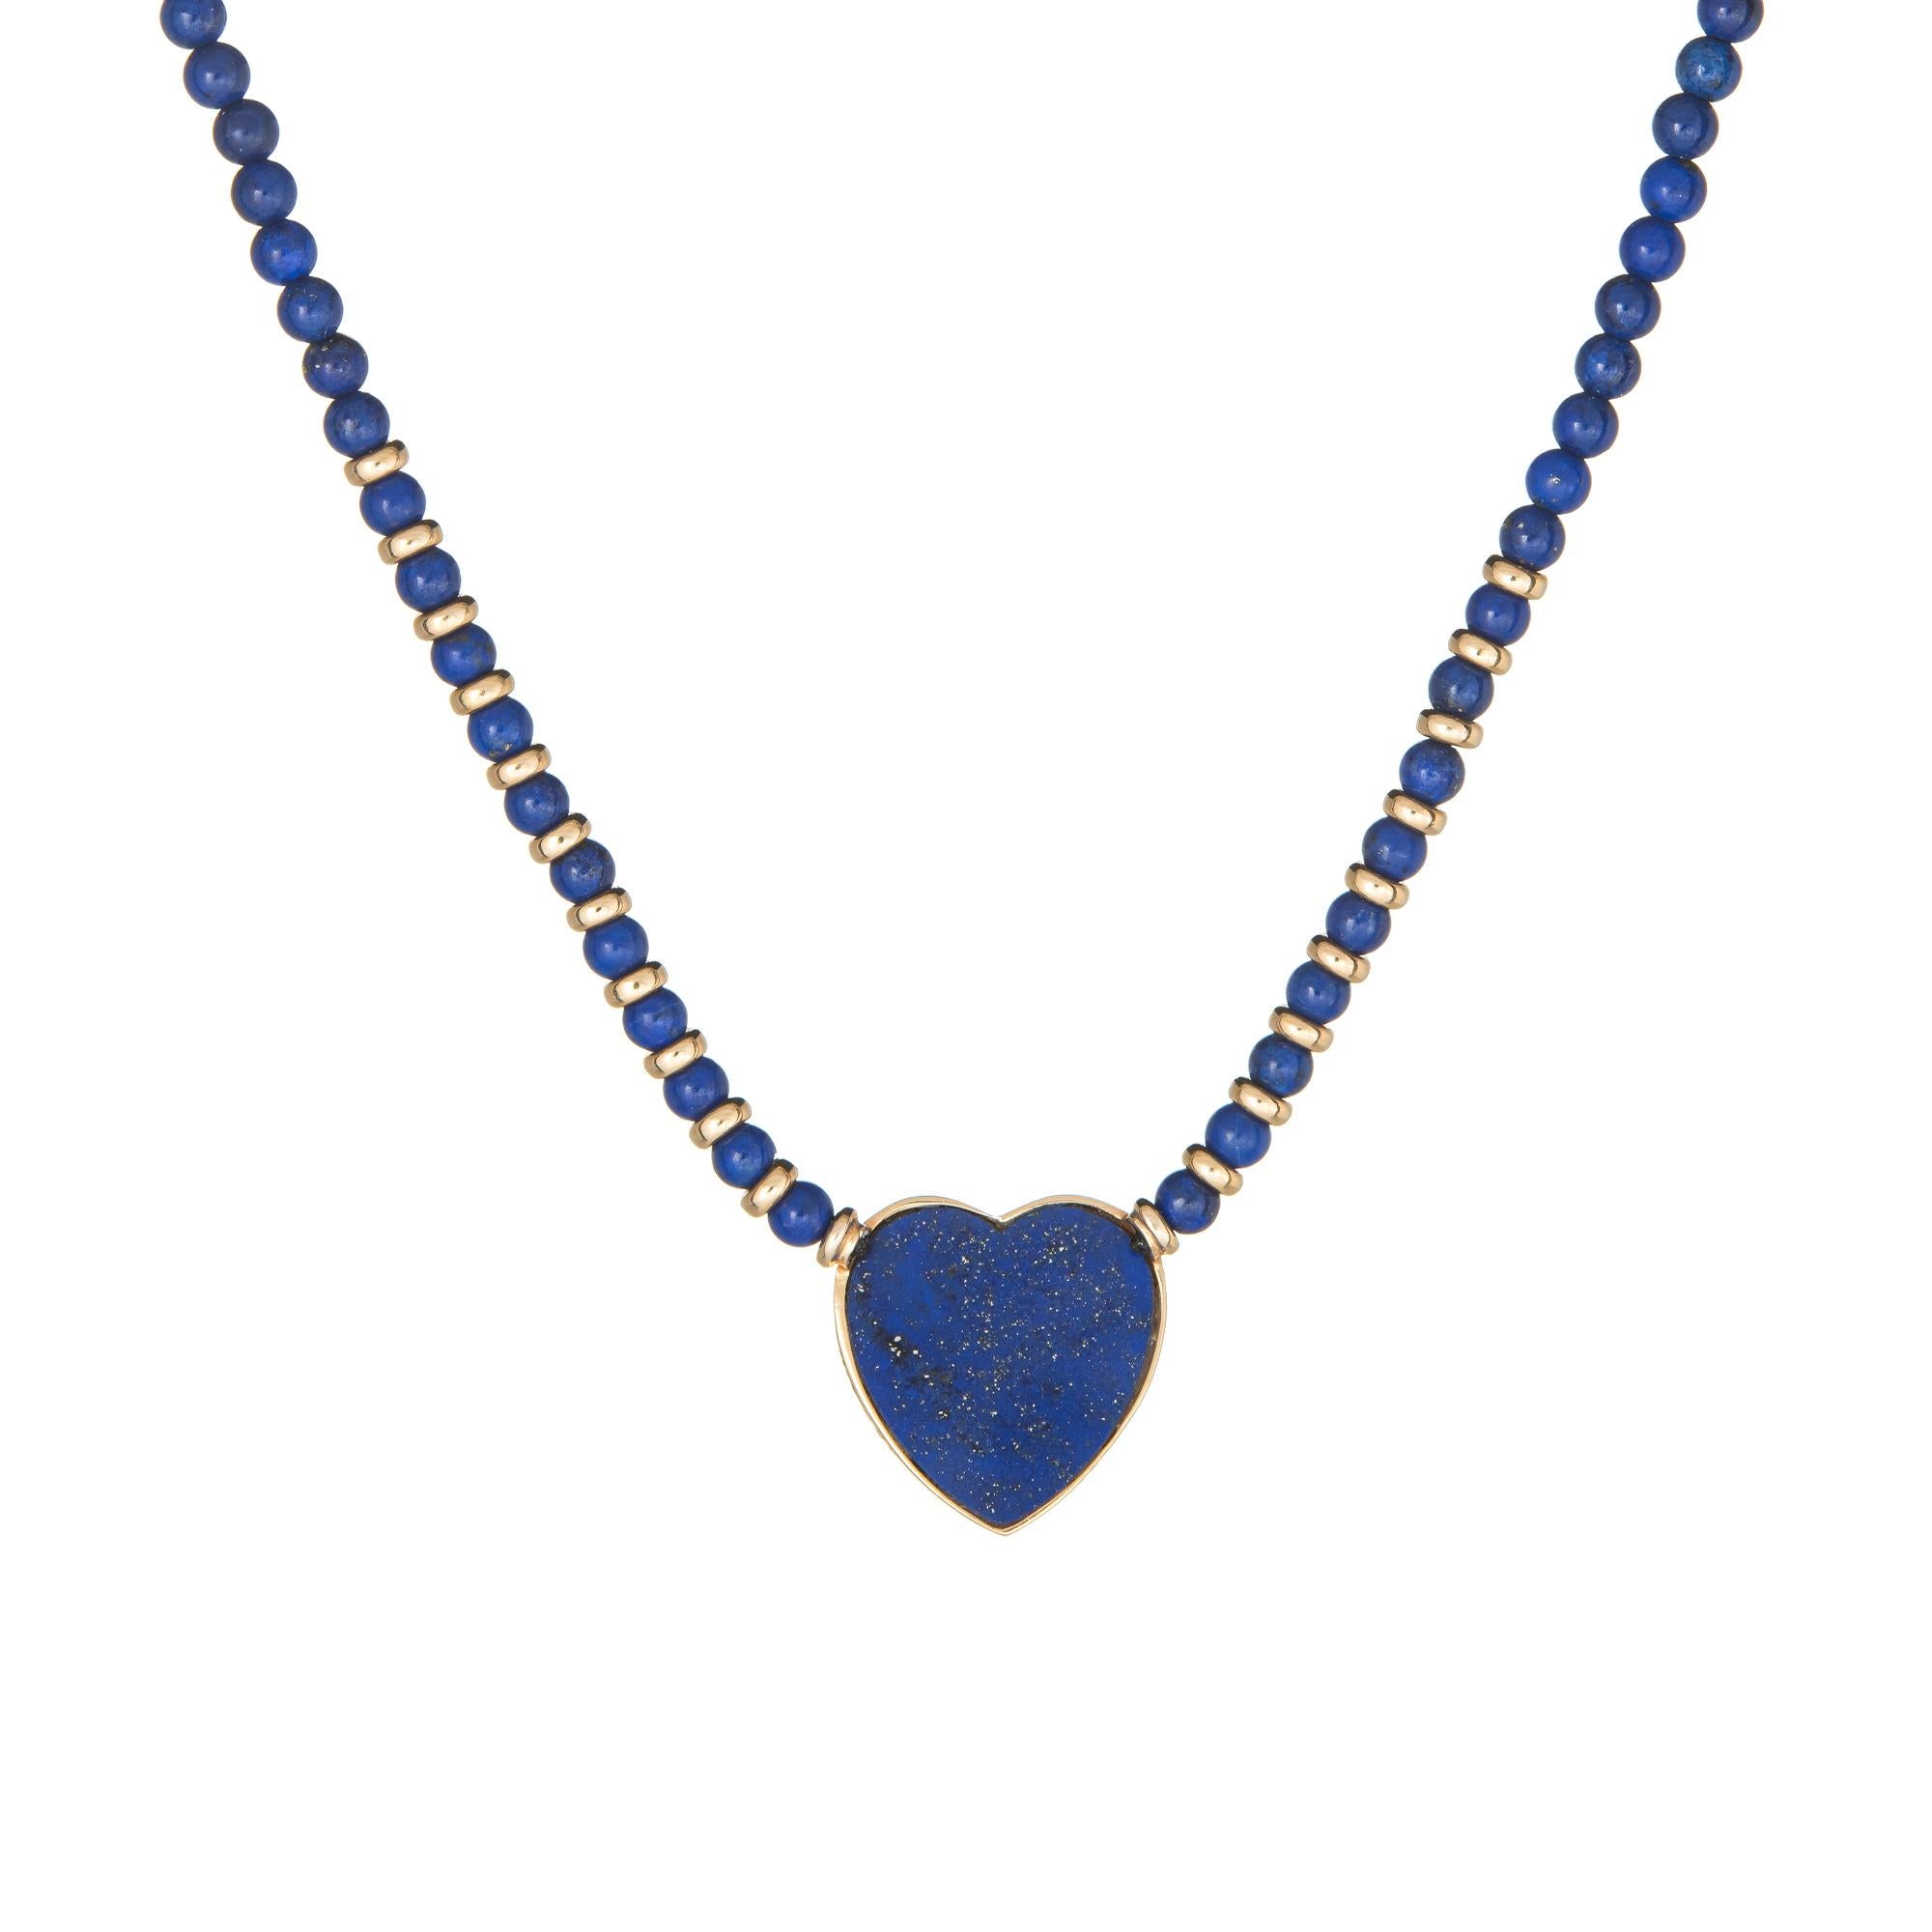 Finely detailed vintage Cartier lapis lazuli heart necklace crafted in 18 karat yellow gold. 

Lapis lazuli beads each measure 3mm with lapis inlaid into the heart.

The necklace is a retired piece and no longer available for sale at retail. The